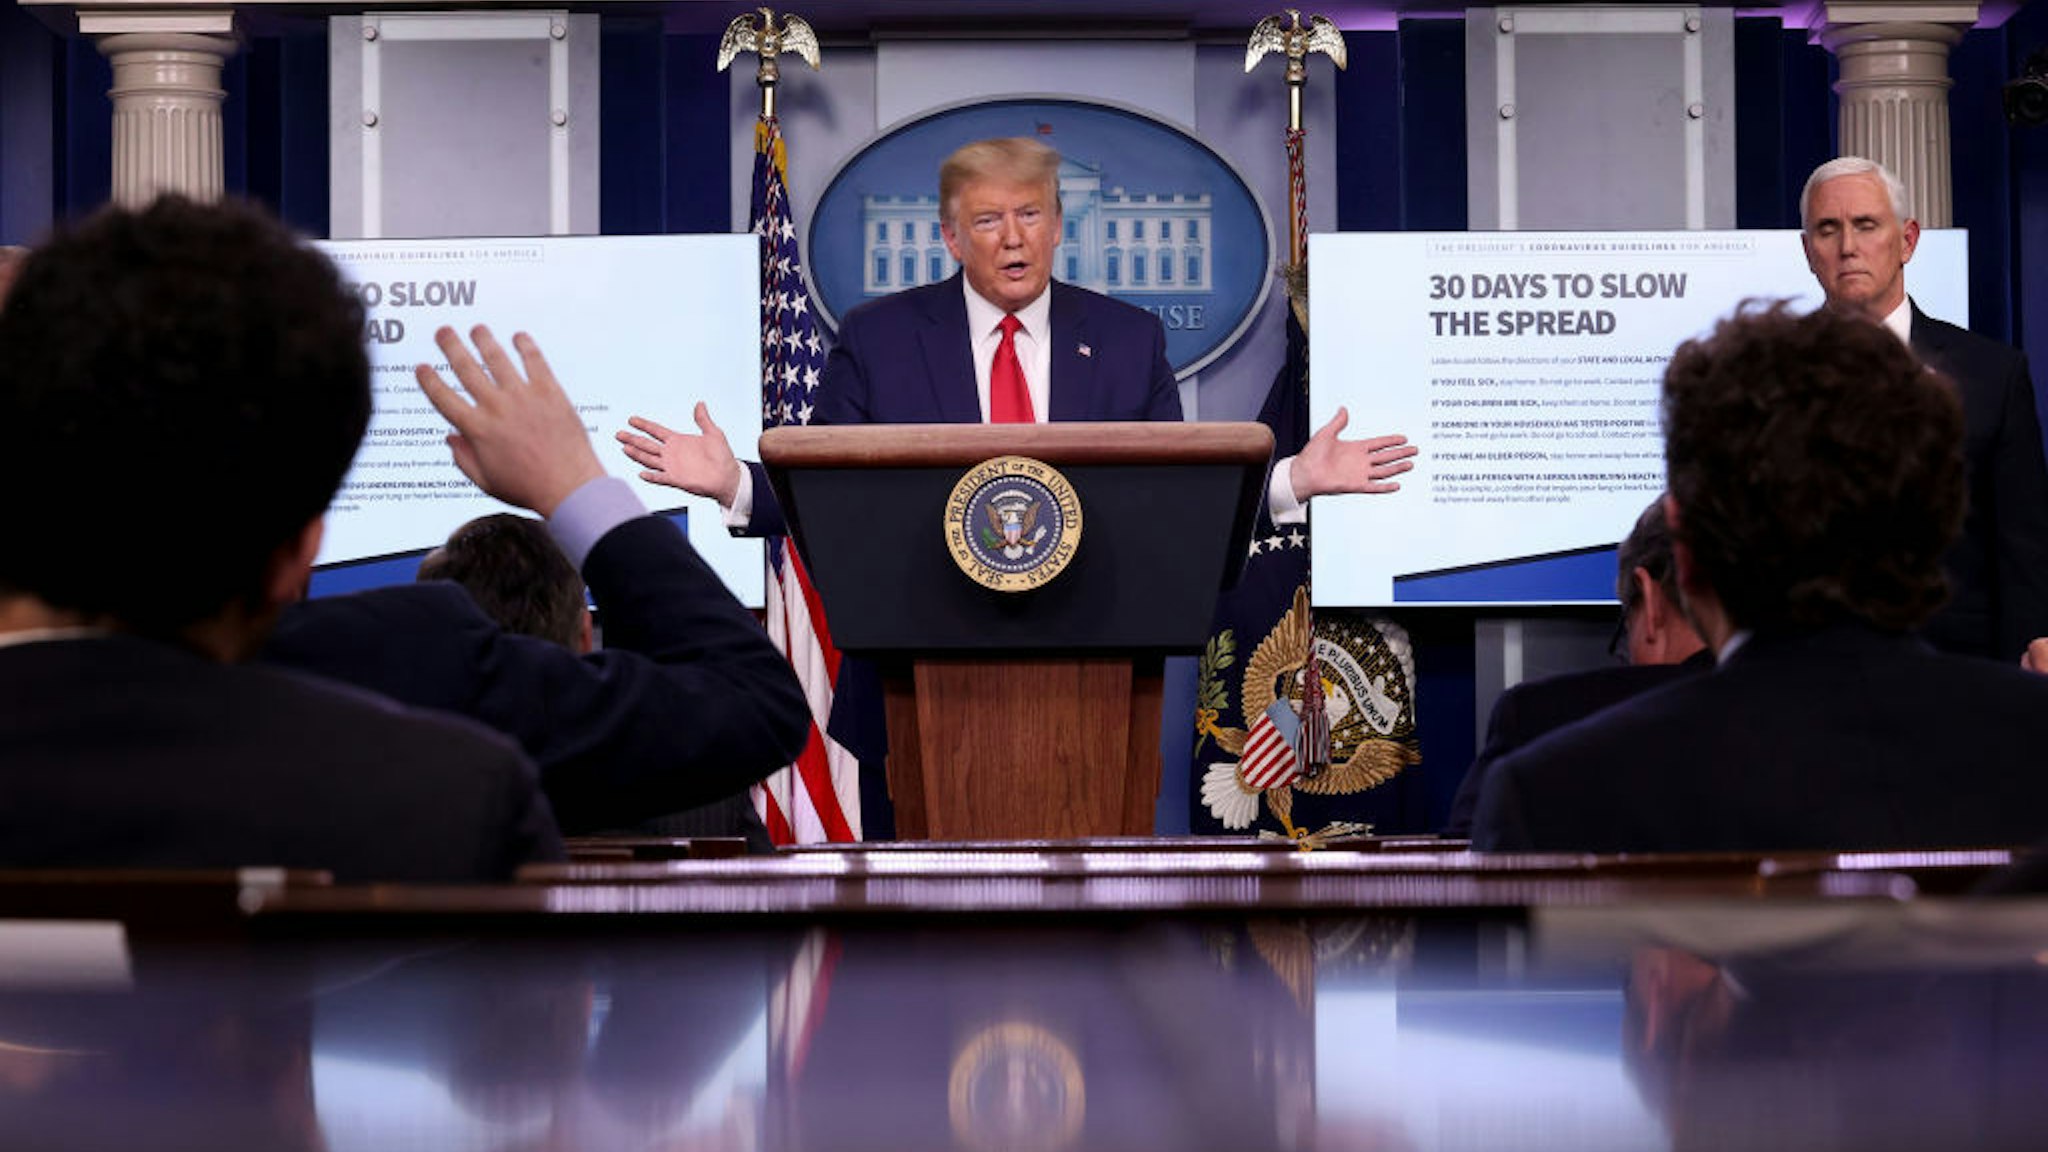 U.S. President Donald Trump participates in the daily coronavirus task force briefing in the Brady Briefing room at the White House on March 31, 2020 in Washington, DC. The top government scientists battling the coronavirus estimated on Tuesday that the virus could kill between 100,000 and 240,000 Americans. Trump warned that there will be a ‚ÄúVery, very painful two weeks‚Äù ahead as the nation continues to grapple with the outbreak of the COVID-19 virus. (Photo by Win McNamee/Getty Images)